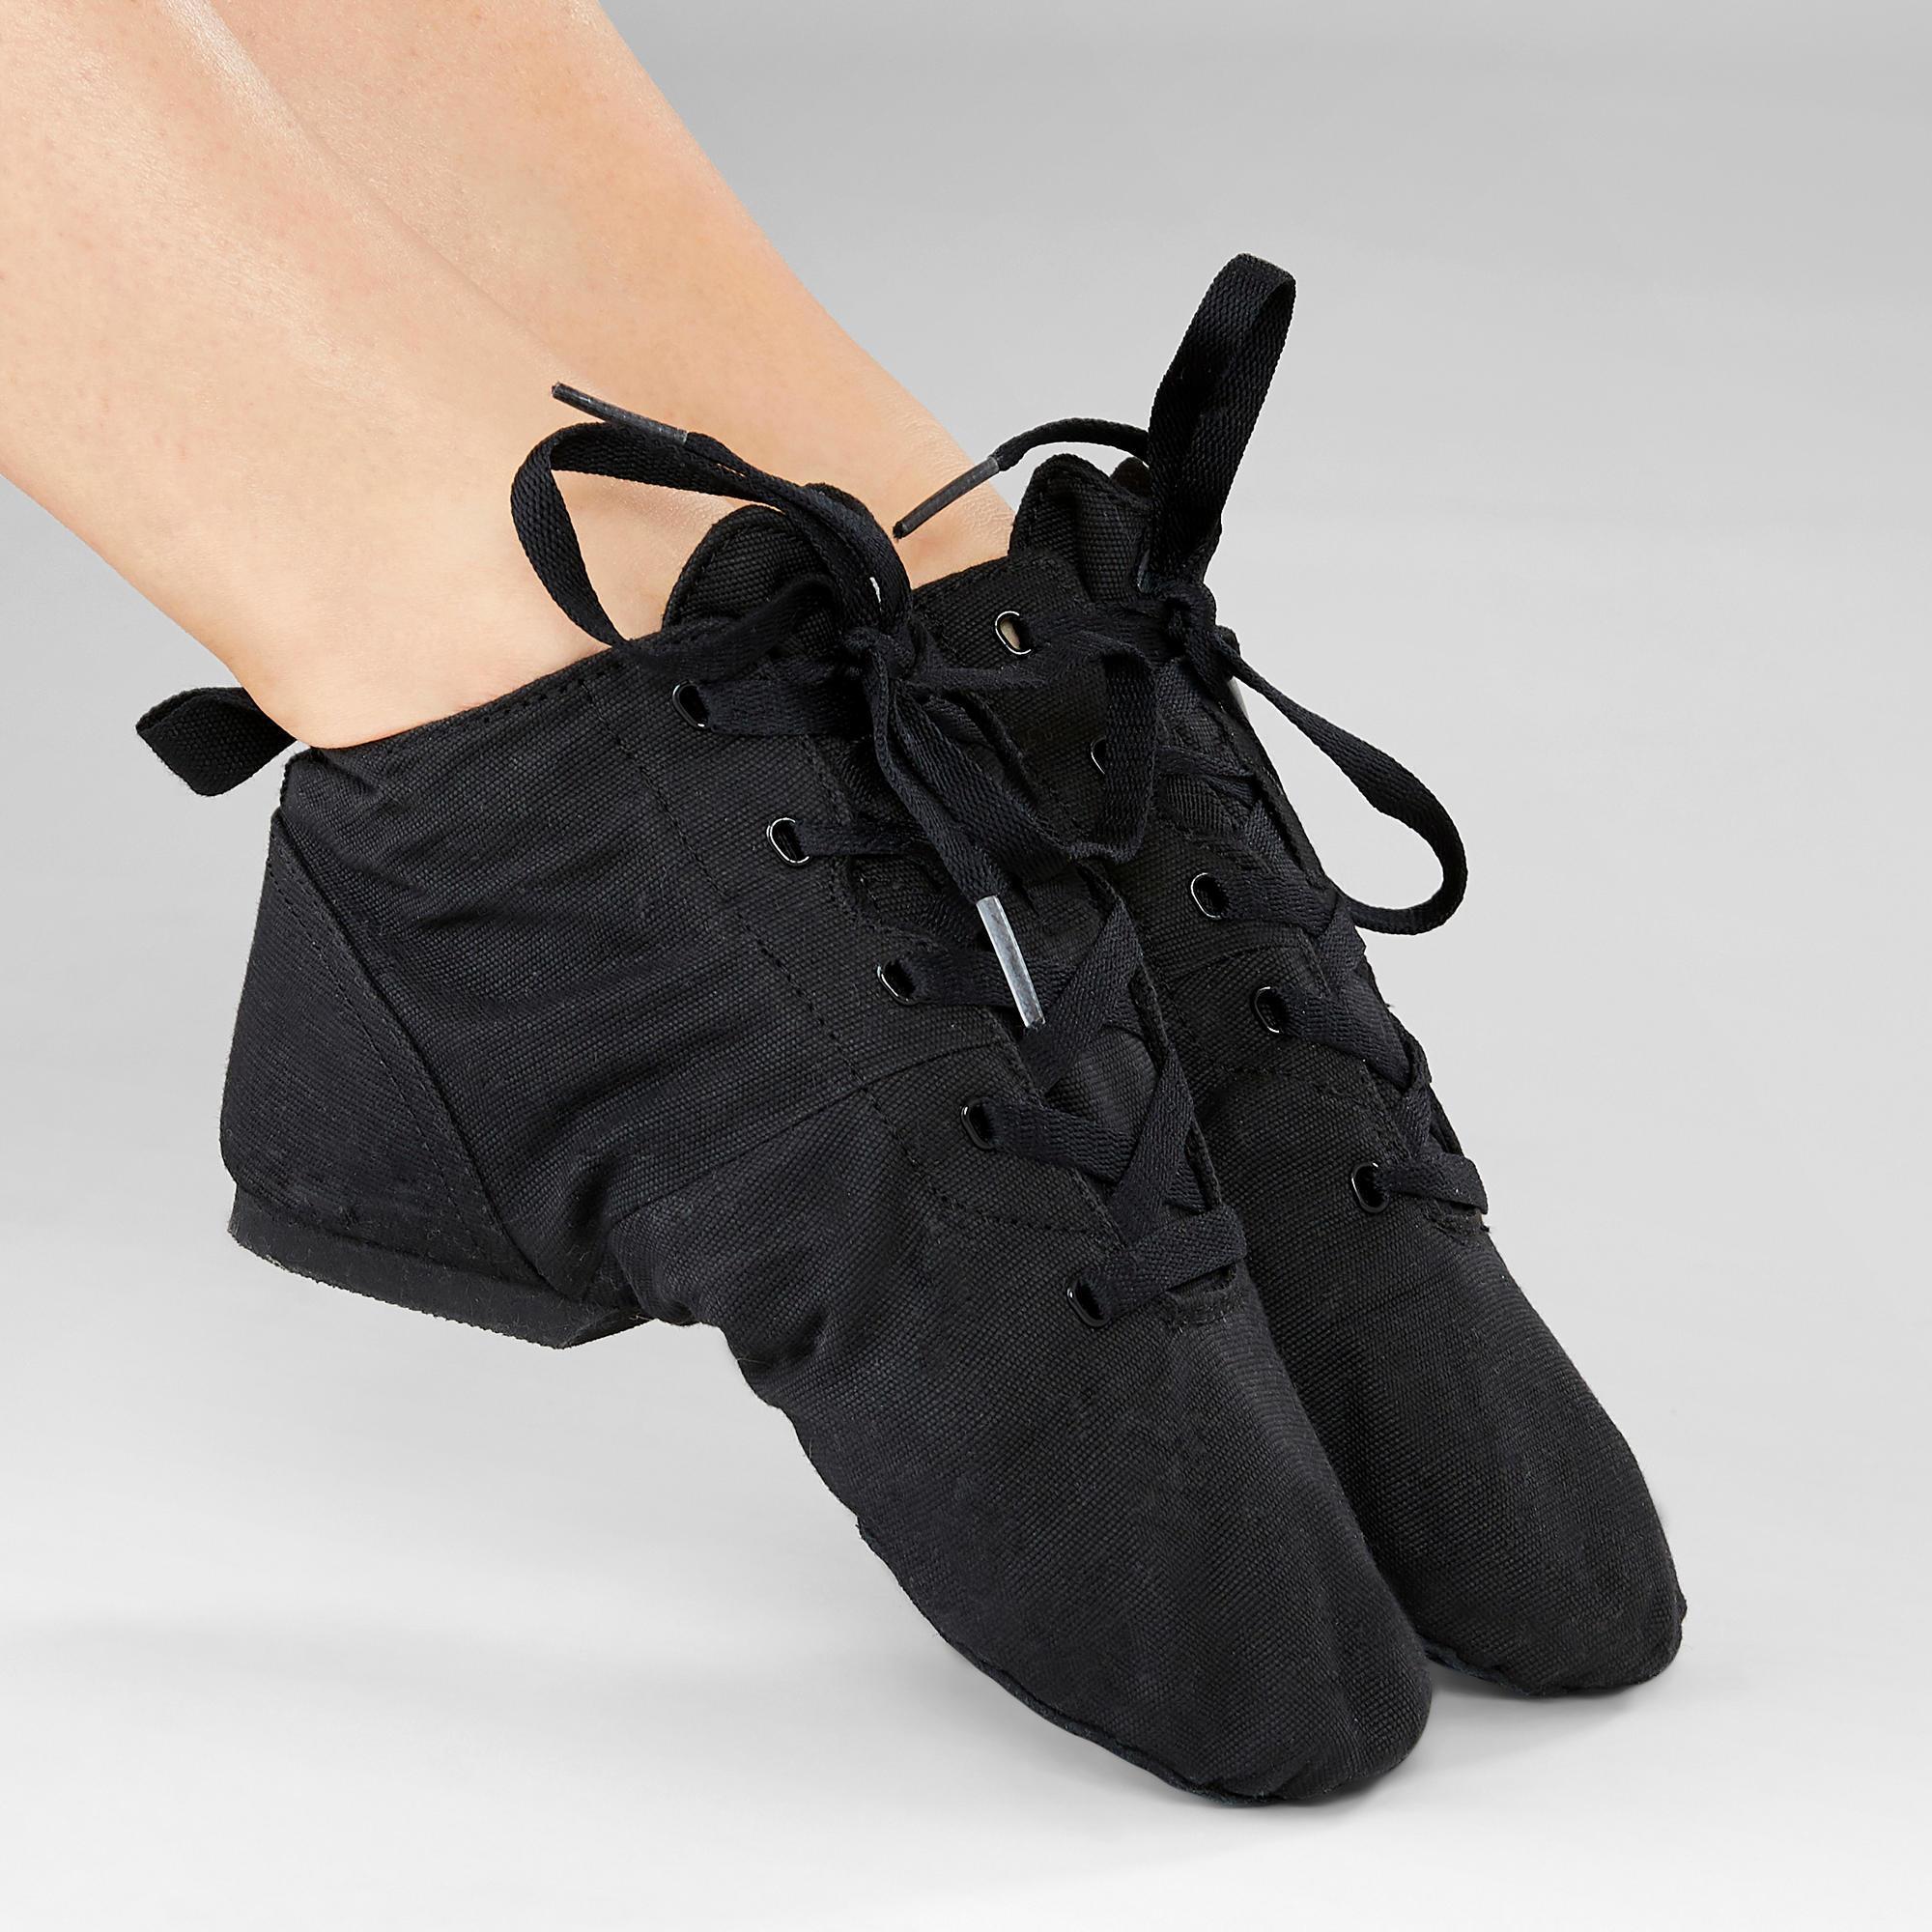 Canvas Modern Jazz Dance Ankle Boots - Slippers - Black 5/7